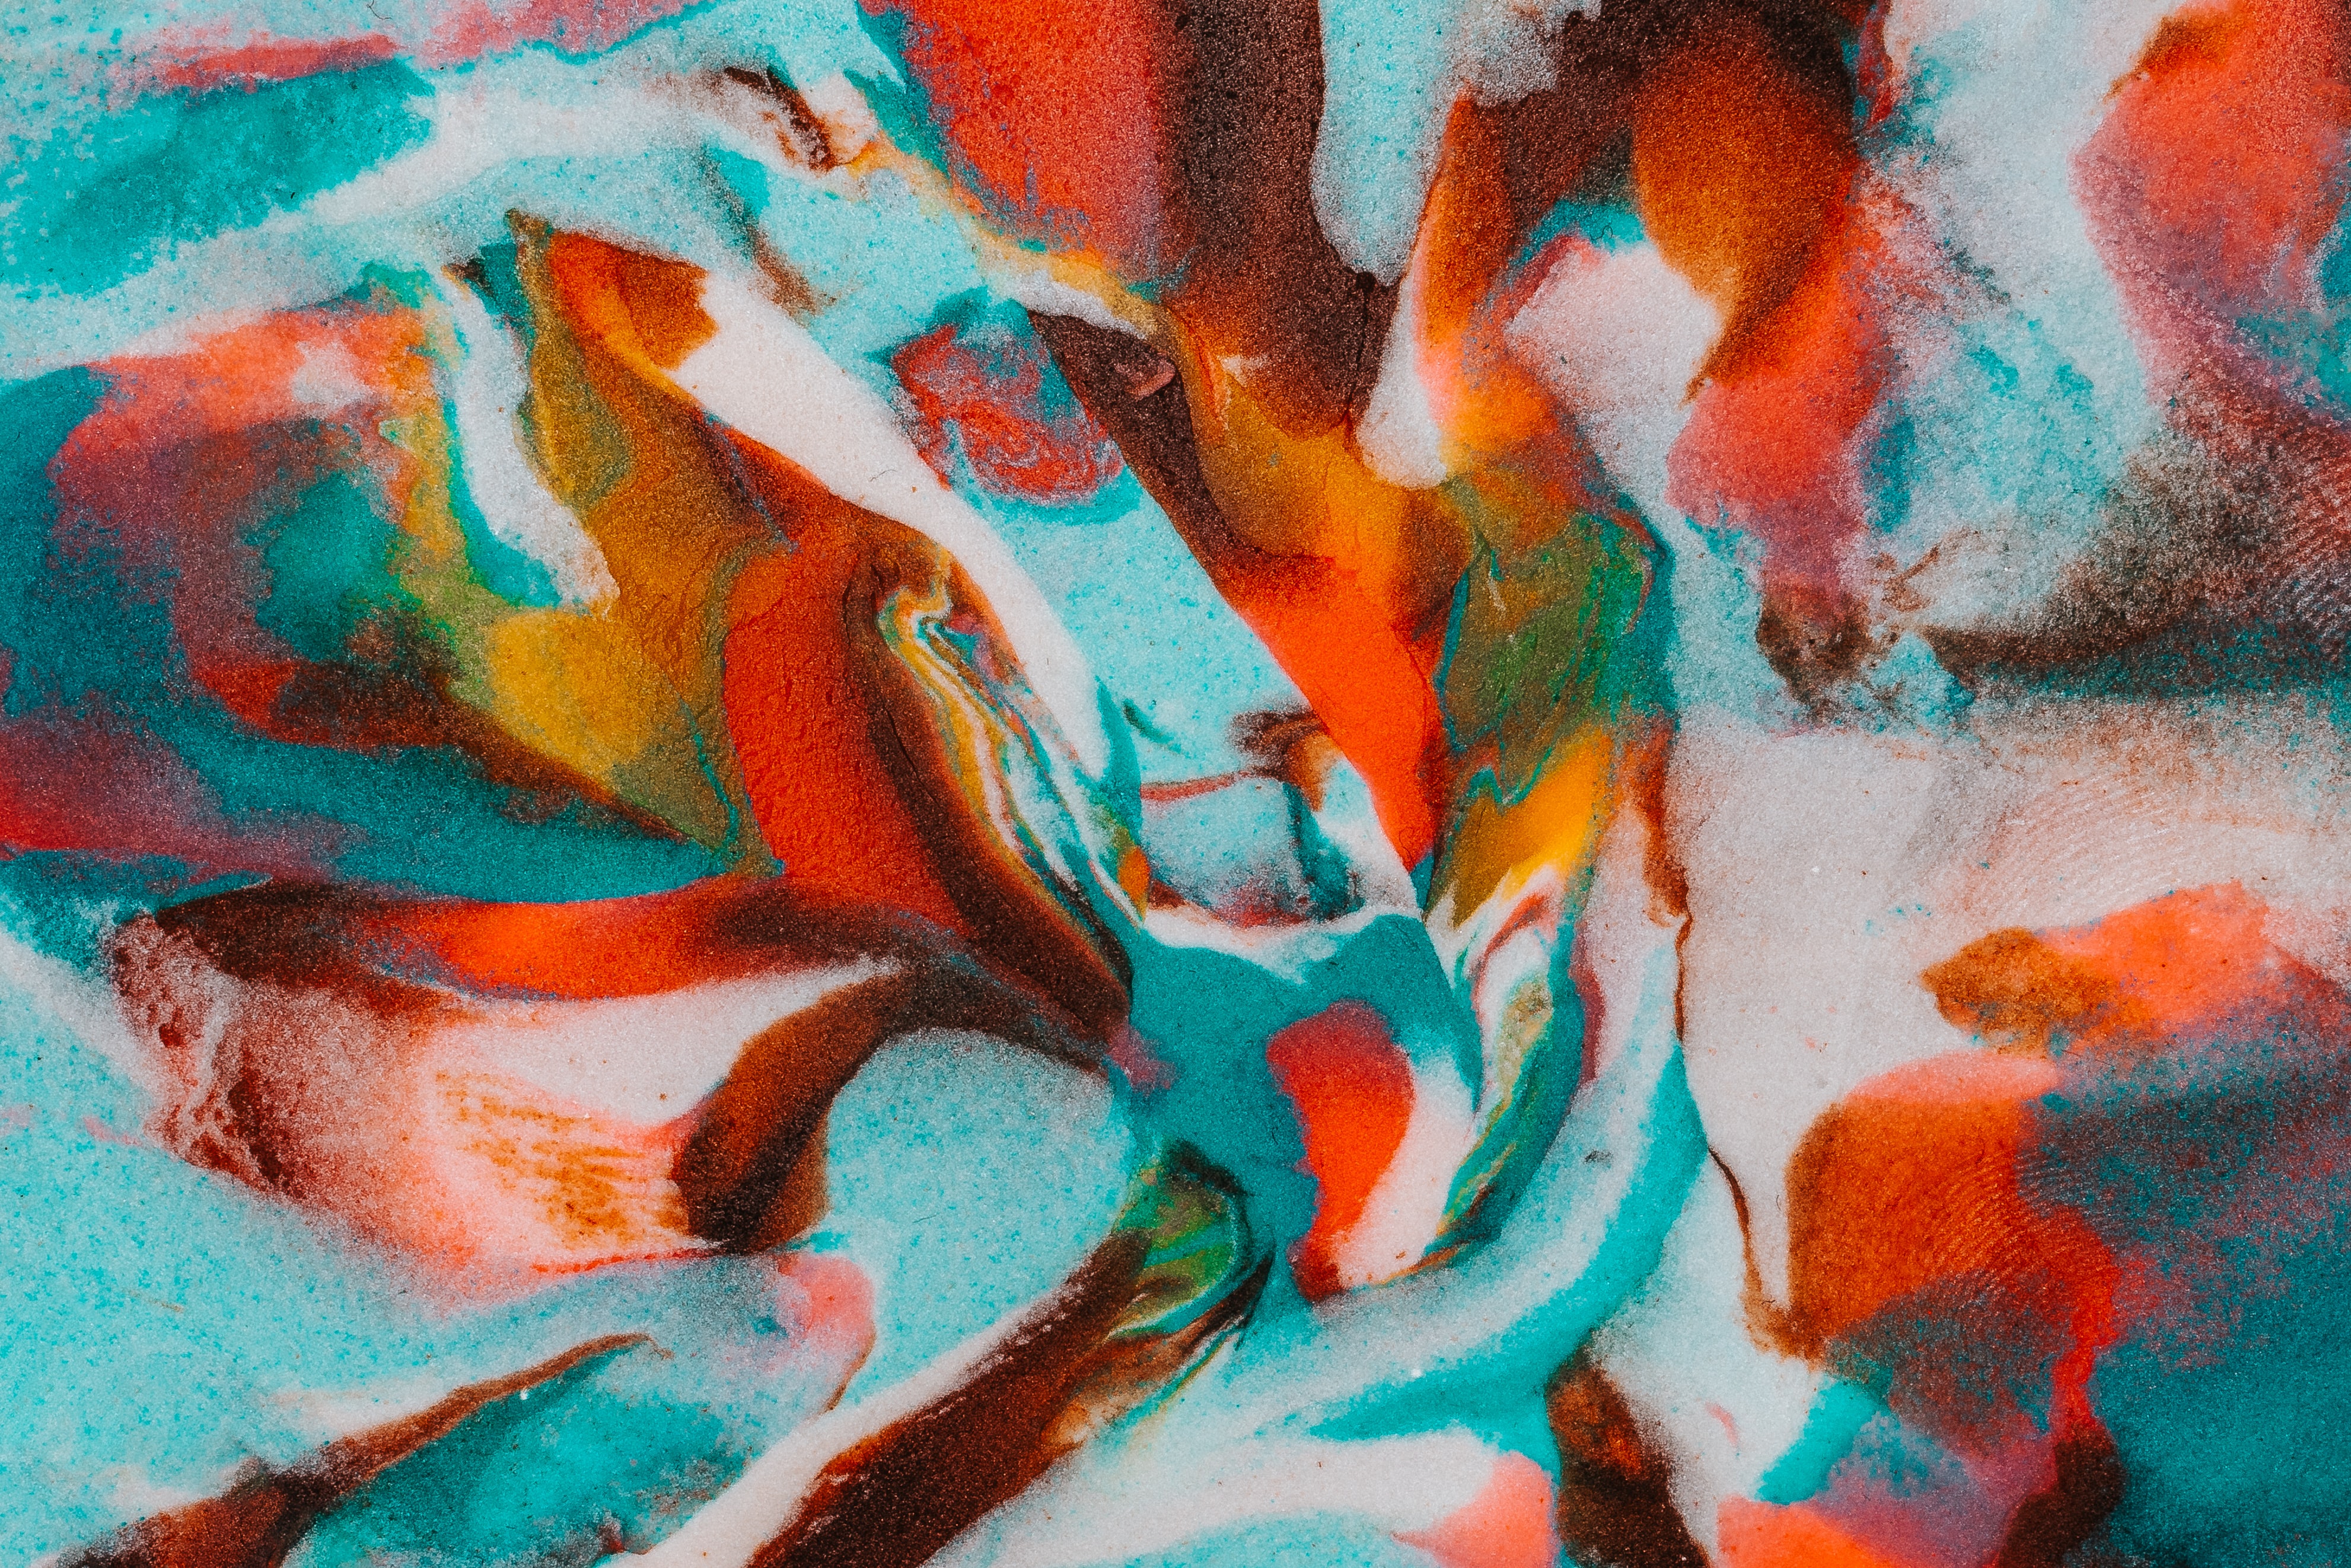 Full HD Wallpaper motley, abstract, multicolored, paint, colors, color, stains, spots